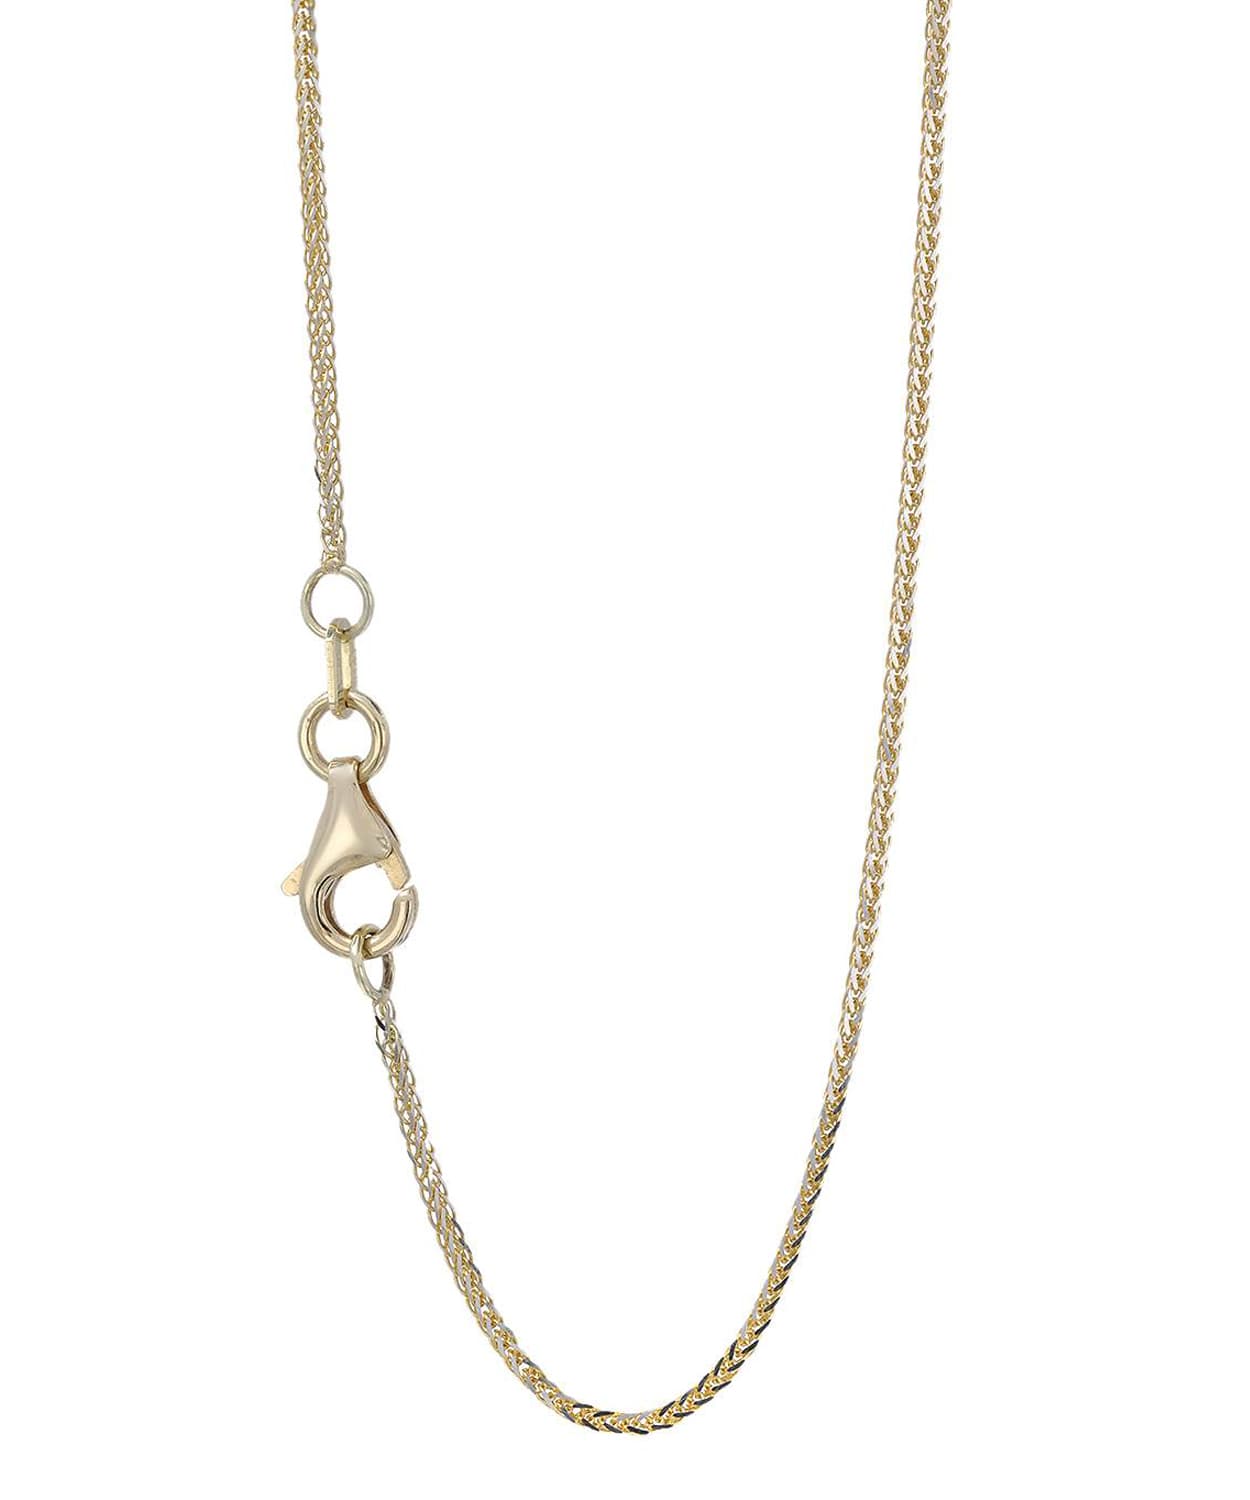 0.8mm 14k Two-Tone Gold Square Wheat Chain View 2